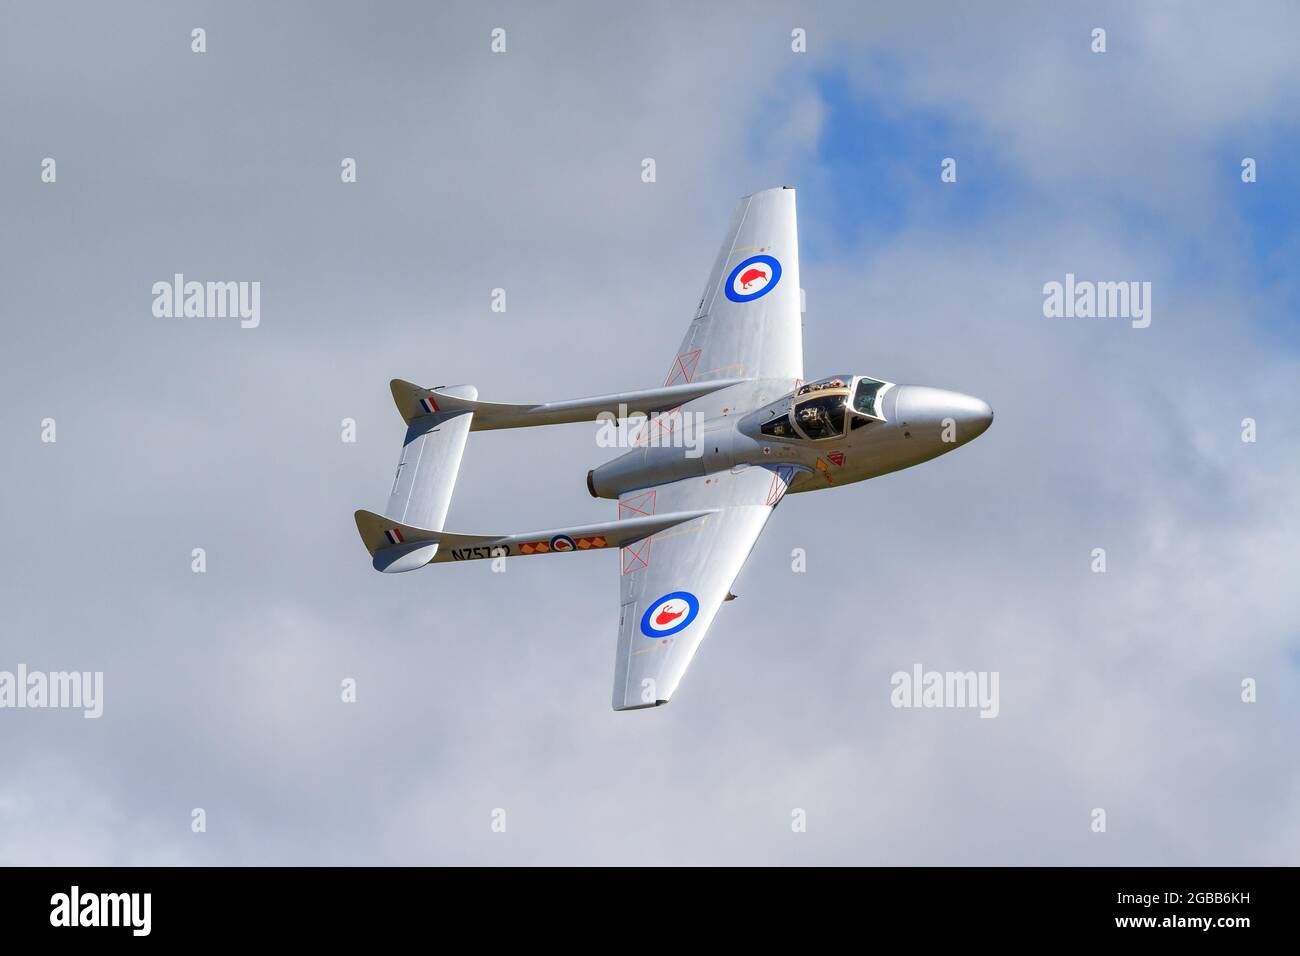 A De Havilland DH115 Vampire, a 1940s British jet fighter, in the sky at an airshow. It is painted in New Zealand Air Force colors Stock Photo